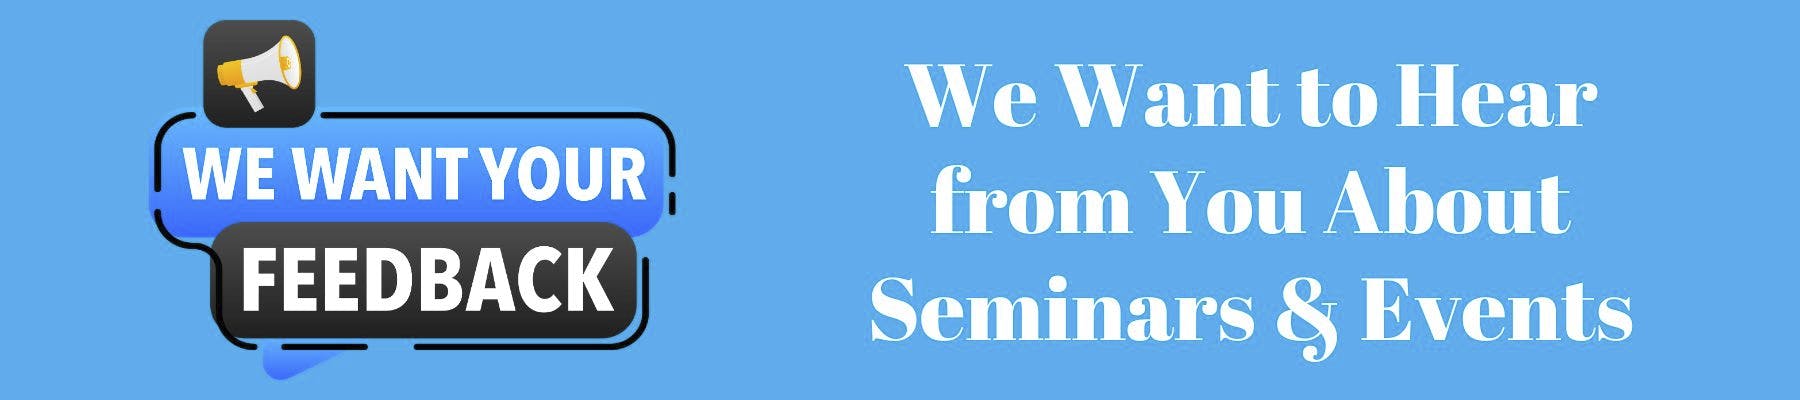 Questionnaire on Seminars and Events